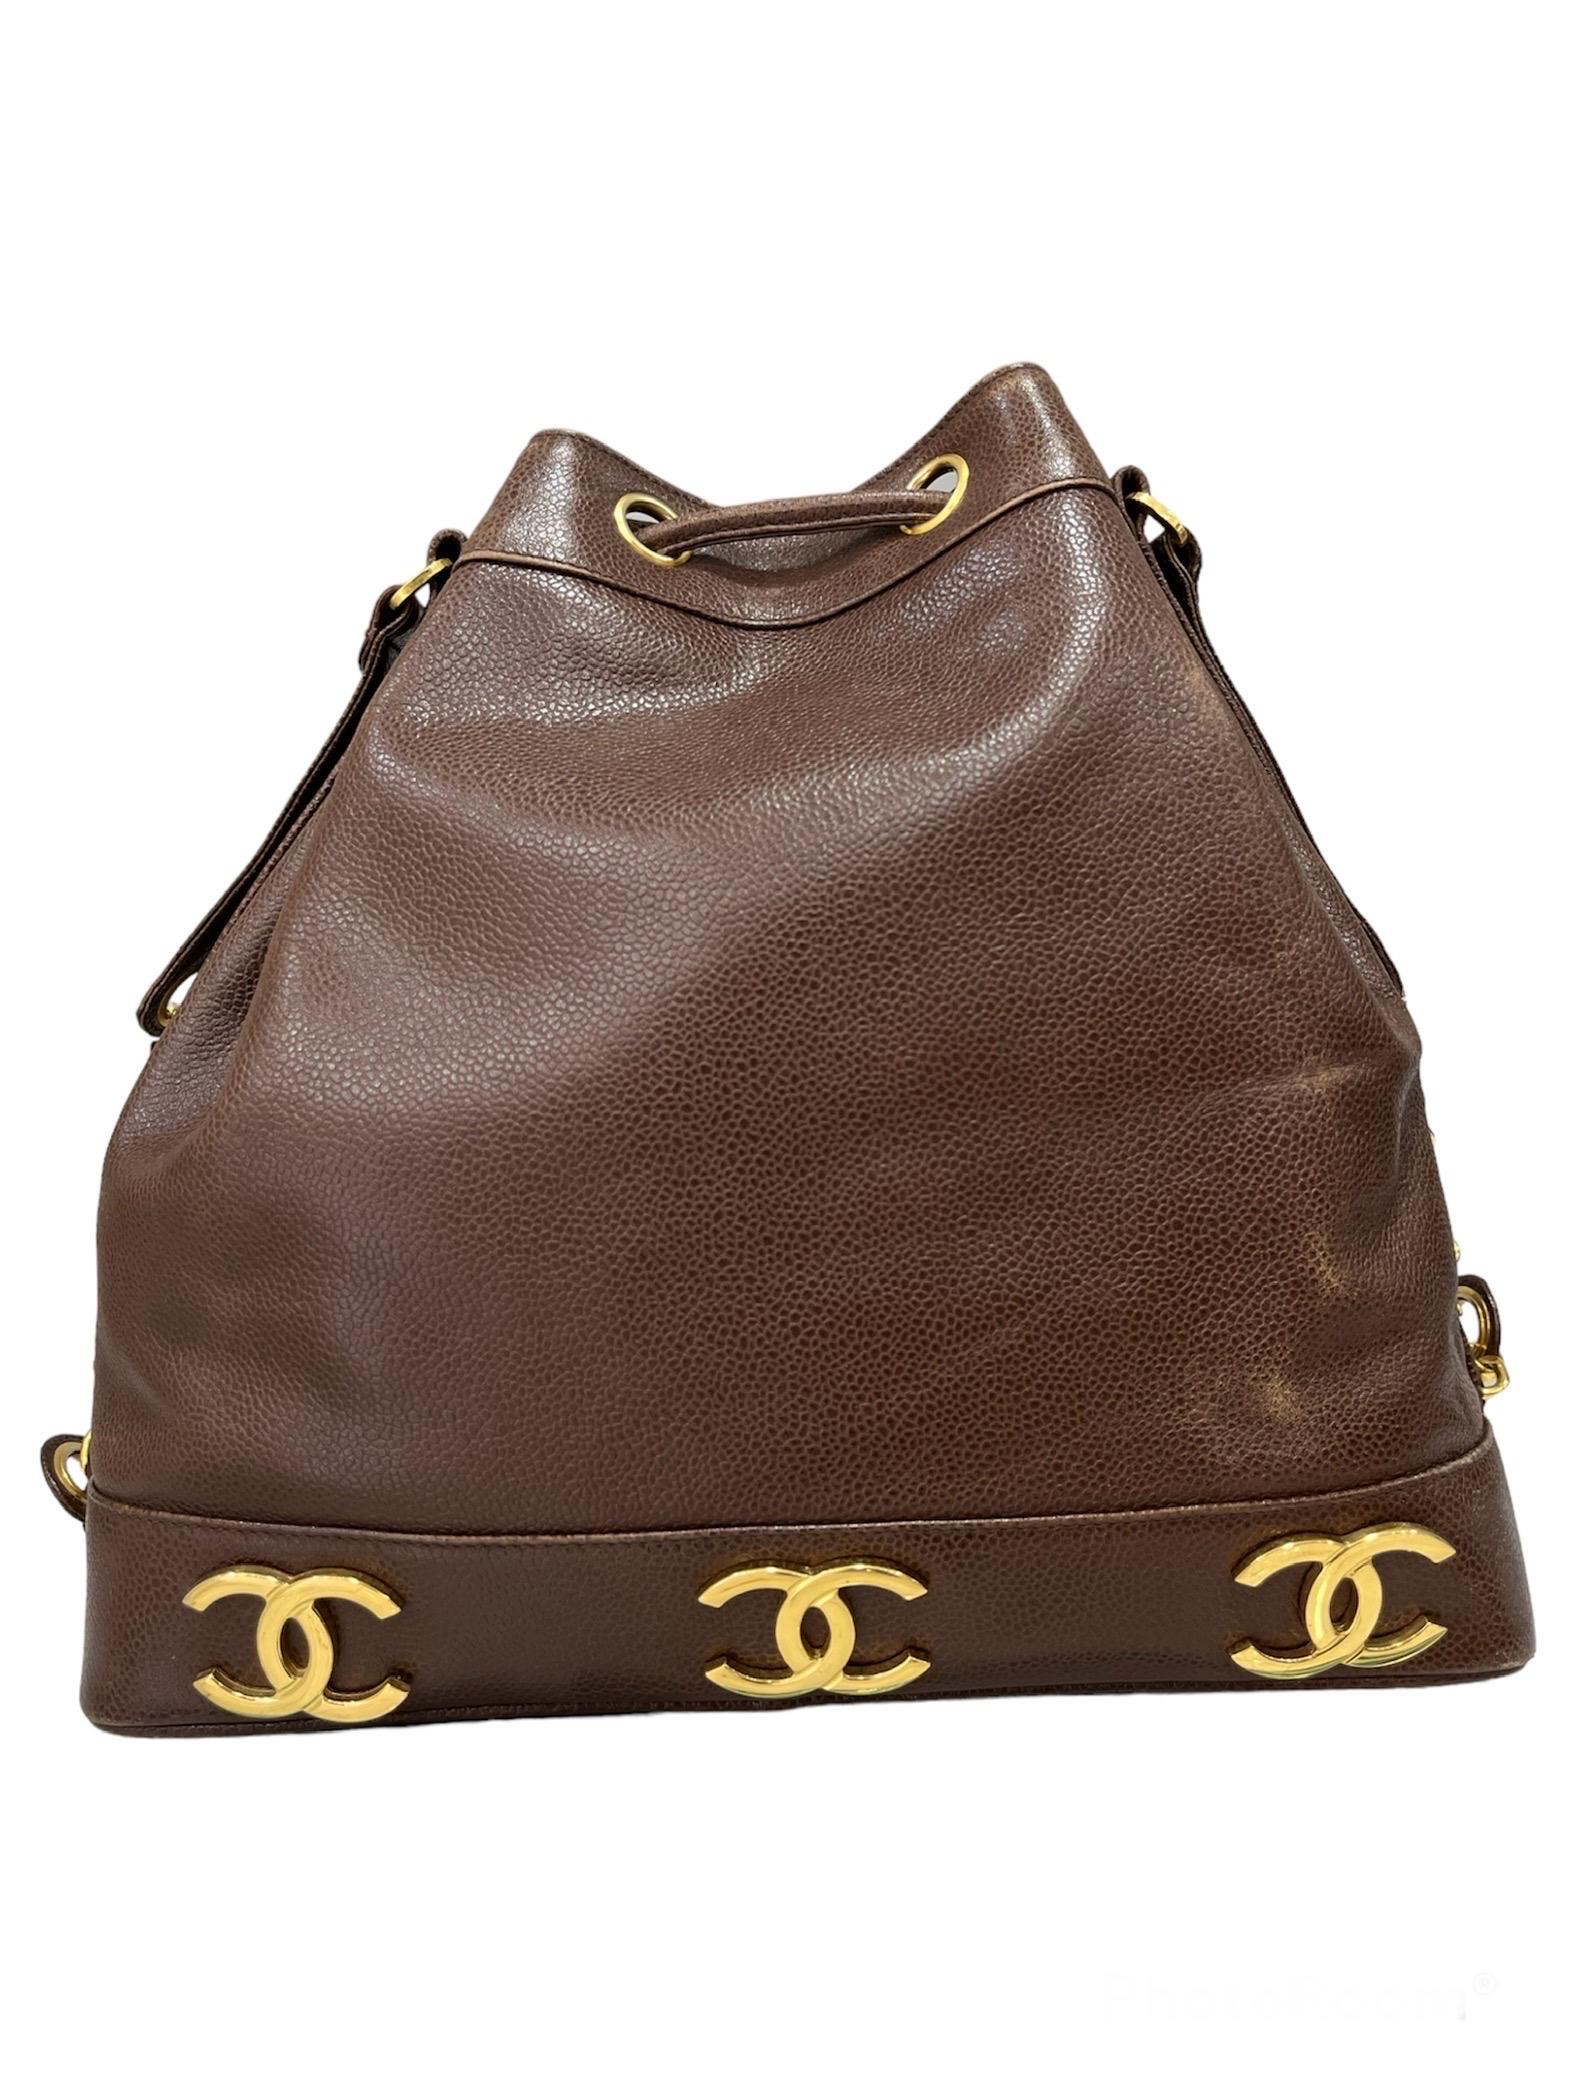 Bucket bag signed Chanel, vintage model, made of textured brown leather with golden hardware. Equipped with a comfortable drawstring closure and an internal pouch, which has a width of 7 centimeters and a height of 4.5 centimeters. Equipped with a